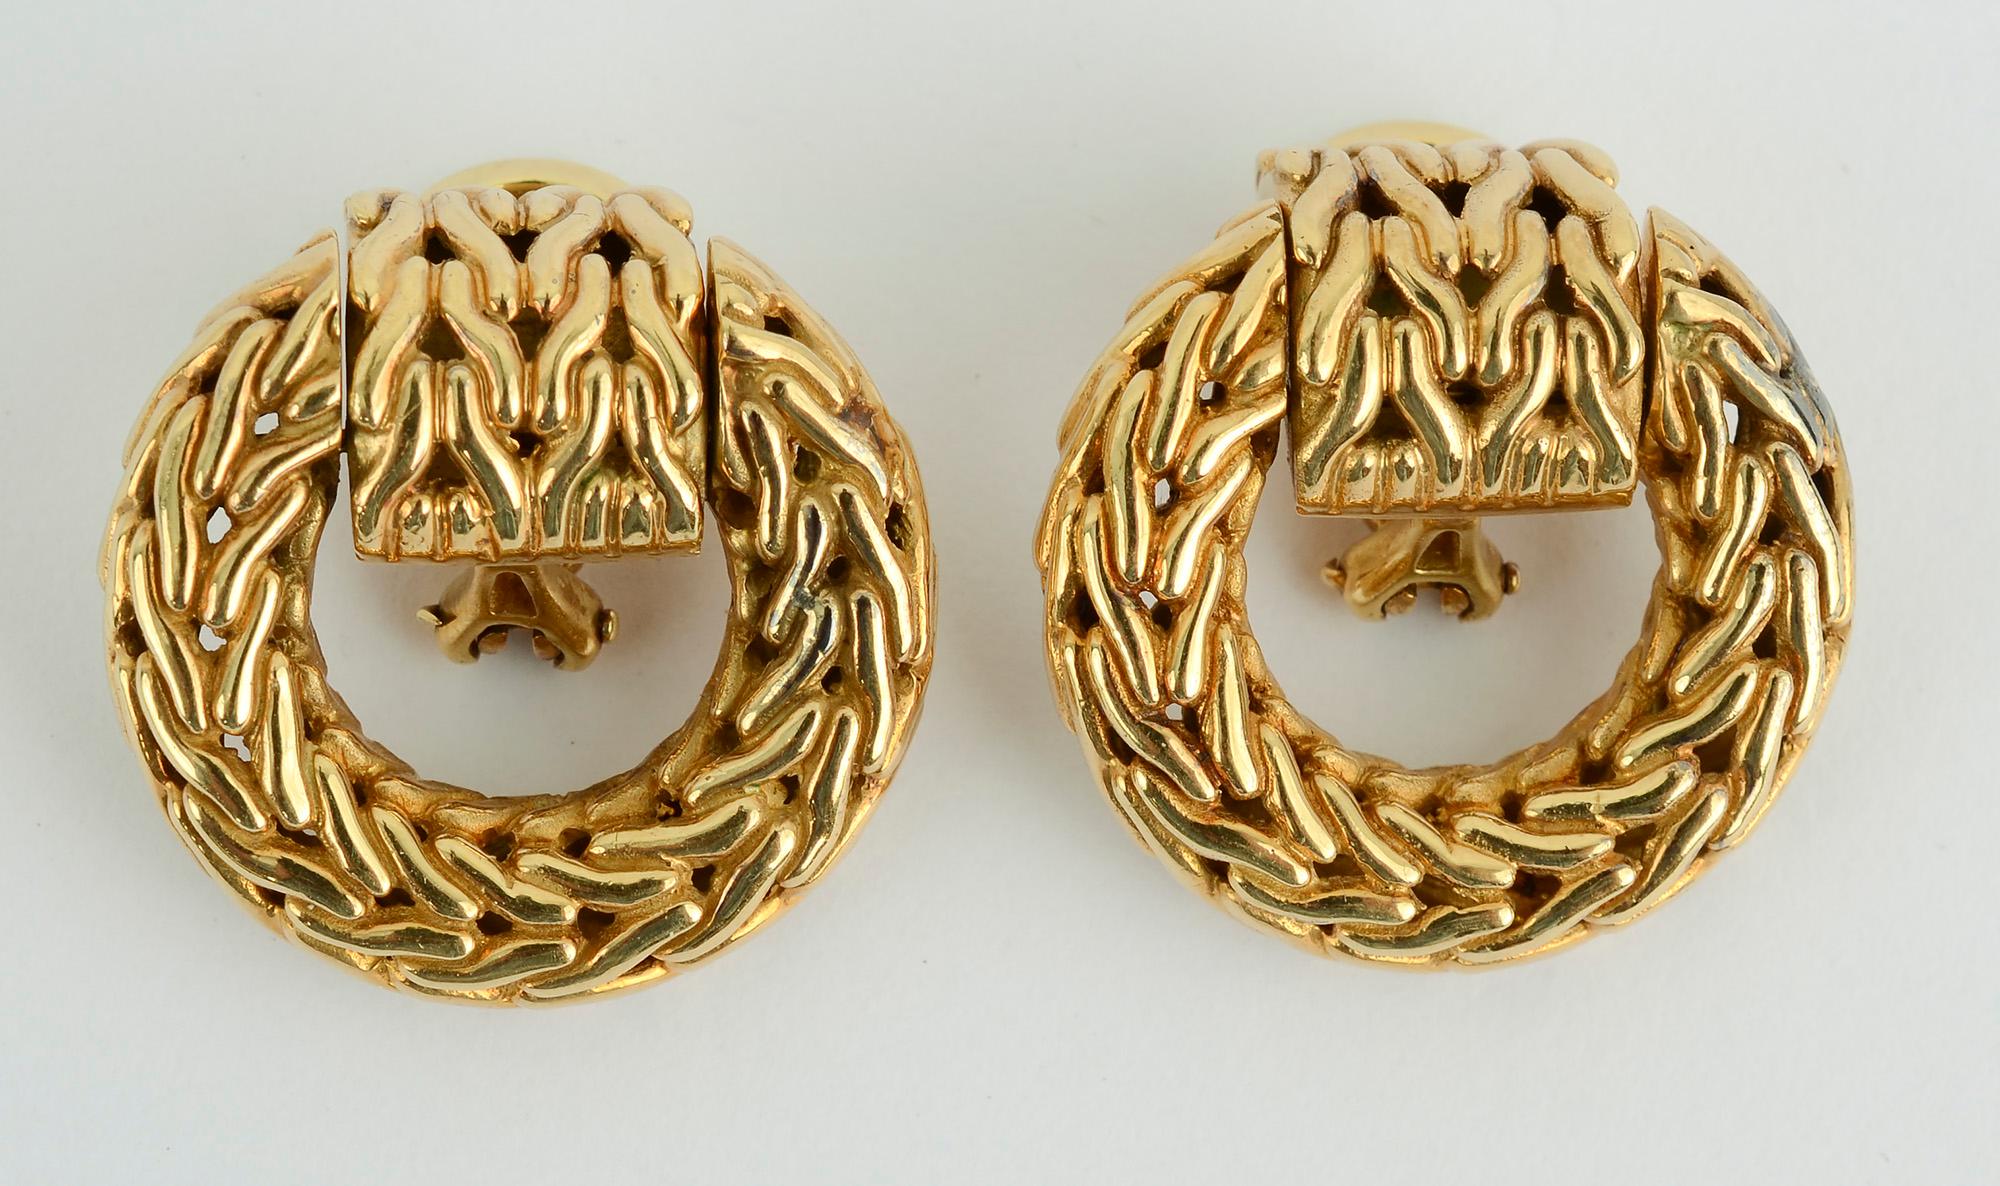 John Hardy 18 karat gold earrings in the woven design he so often favors. At the top of the circle is a movable curved band giving the earrings some play when worn. Clip backs can be converted to posts. The earrings are 1 inch in length and 15/16